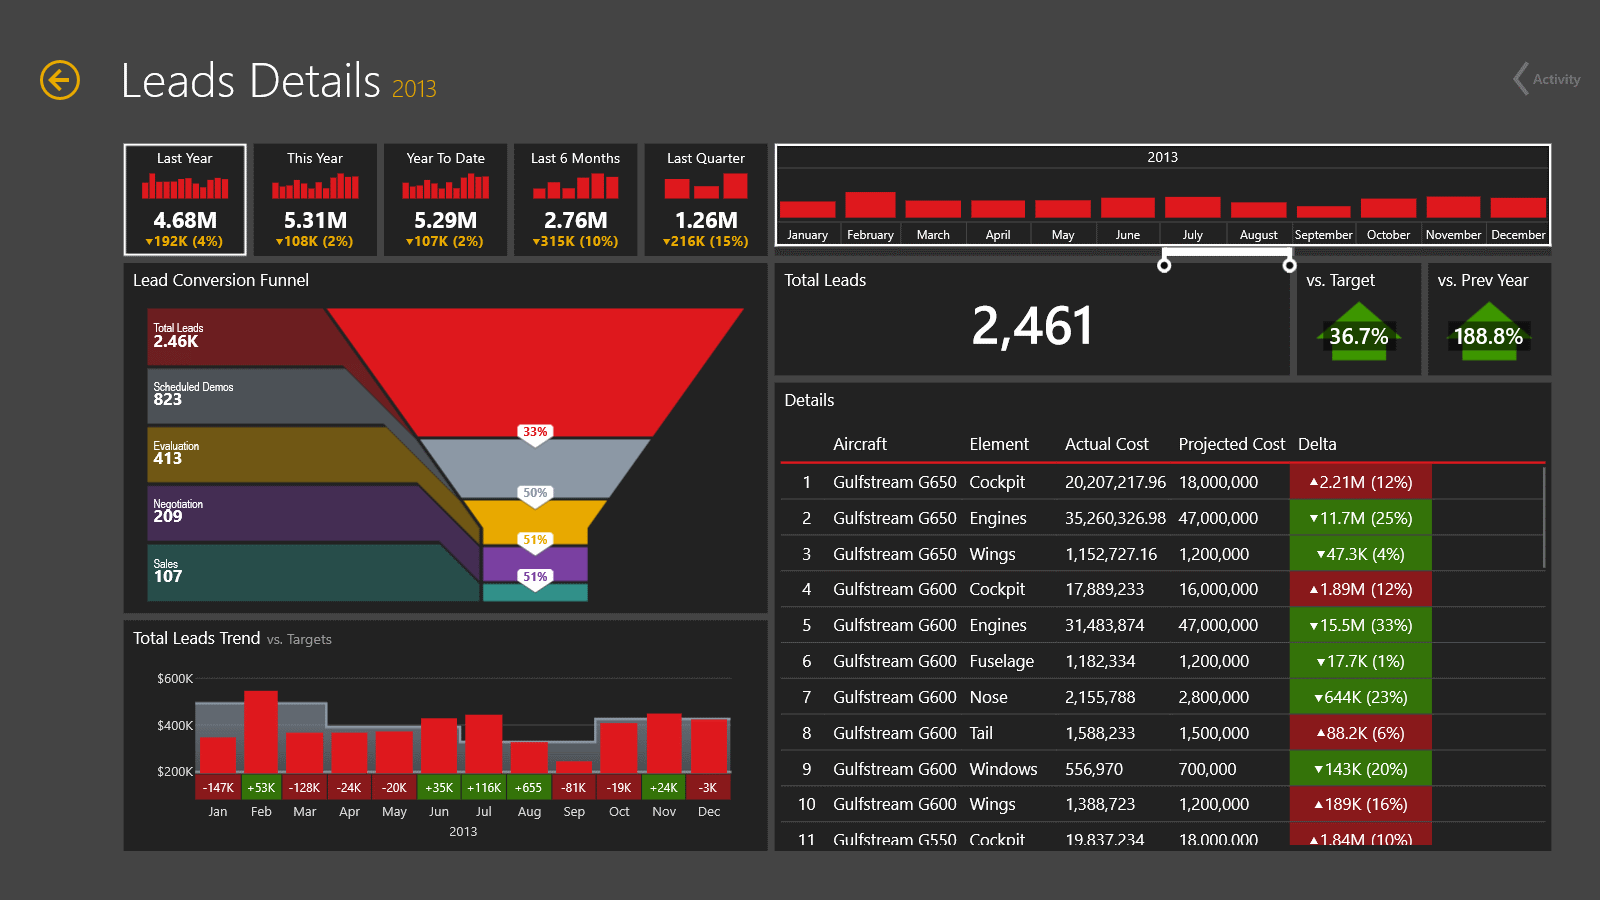 Dashboard: Leads Details